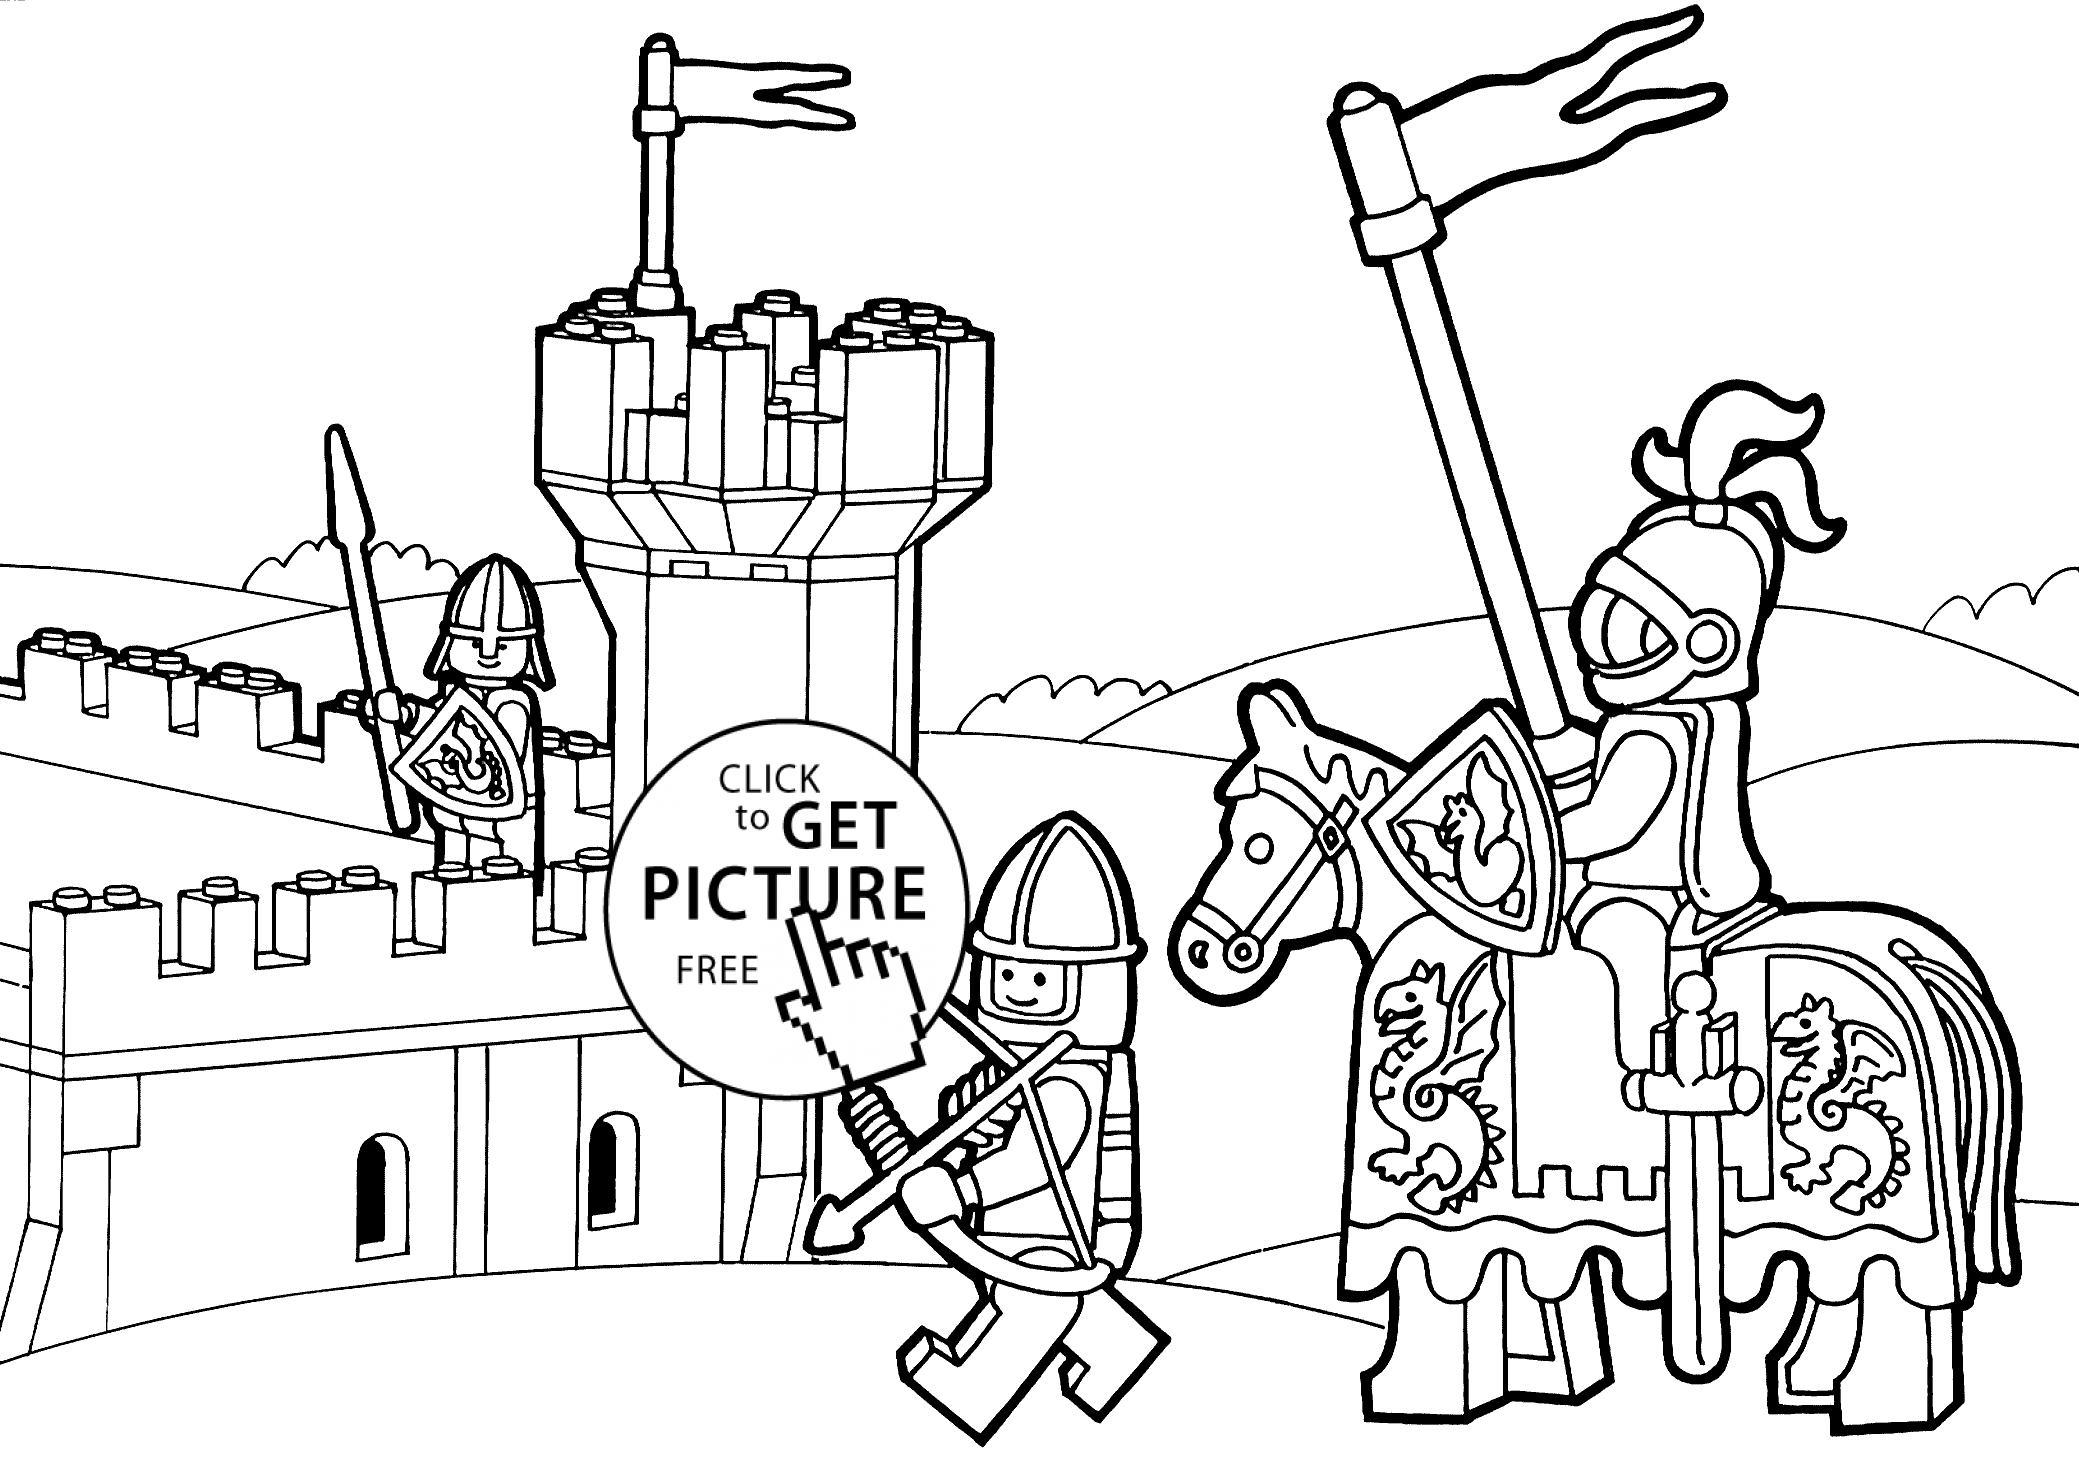 Lego Duplo Knights Coloring Page For Kids Printable Free Lego Duplo Lego Coloring Pages Lego Coloring Castle Coloring Page